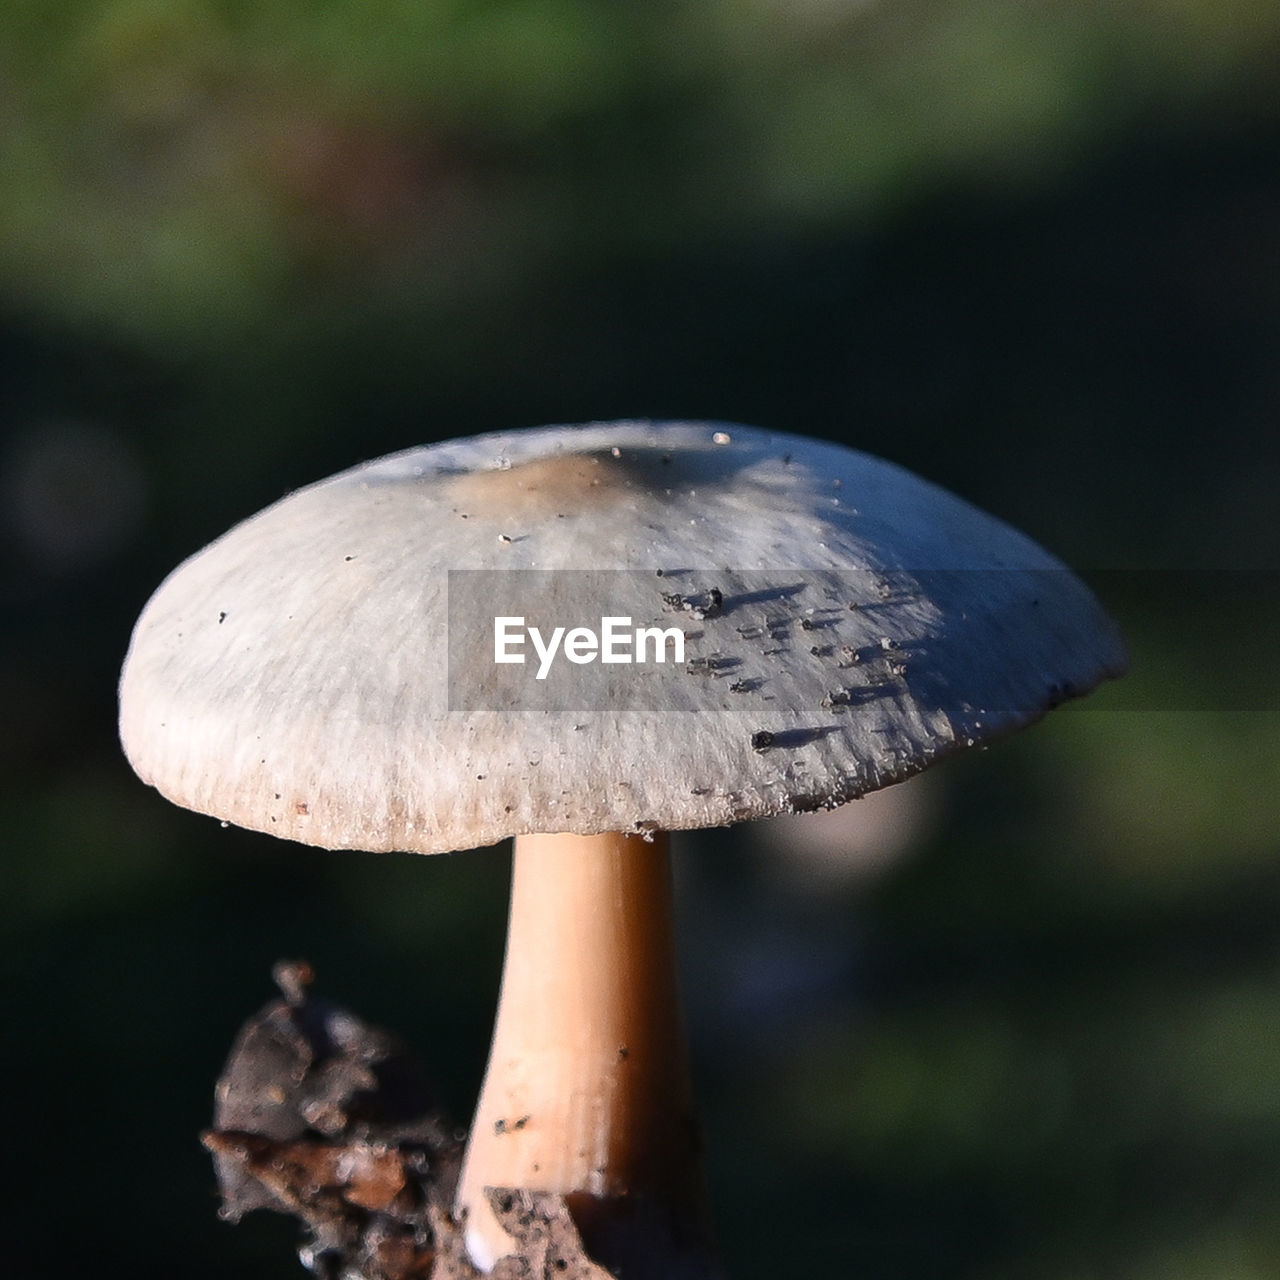 fungus, mushroom, vegetable, nature, close-up, food, plant, forest, growth, macro photography, land, tree, no people, focus on foreground, outdoors, beauty in nature, food and drink, agaricaceae, edible mushroom, toadstool, fragility, leaf, autumn, day, plant stem